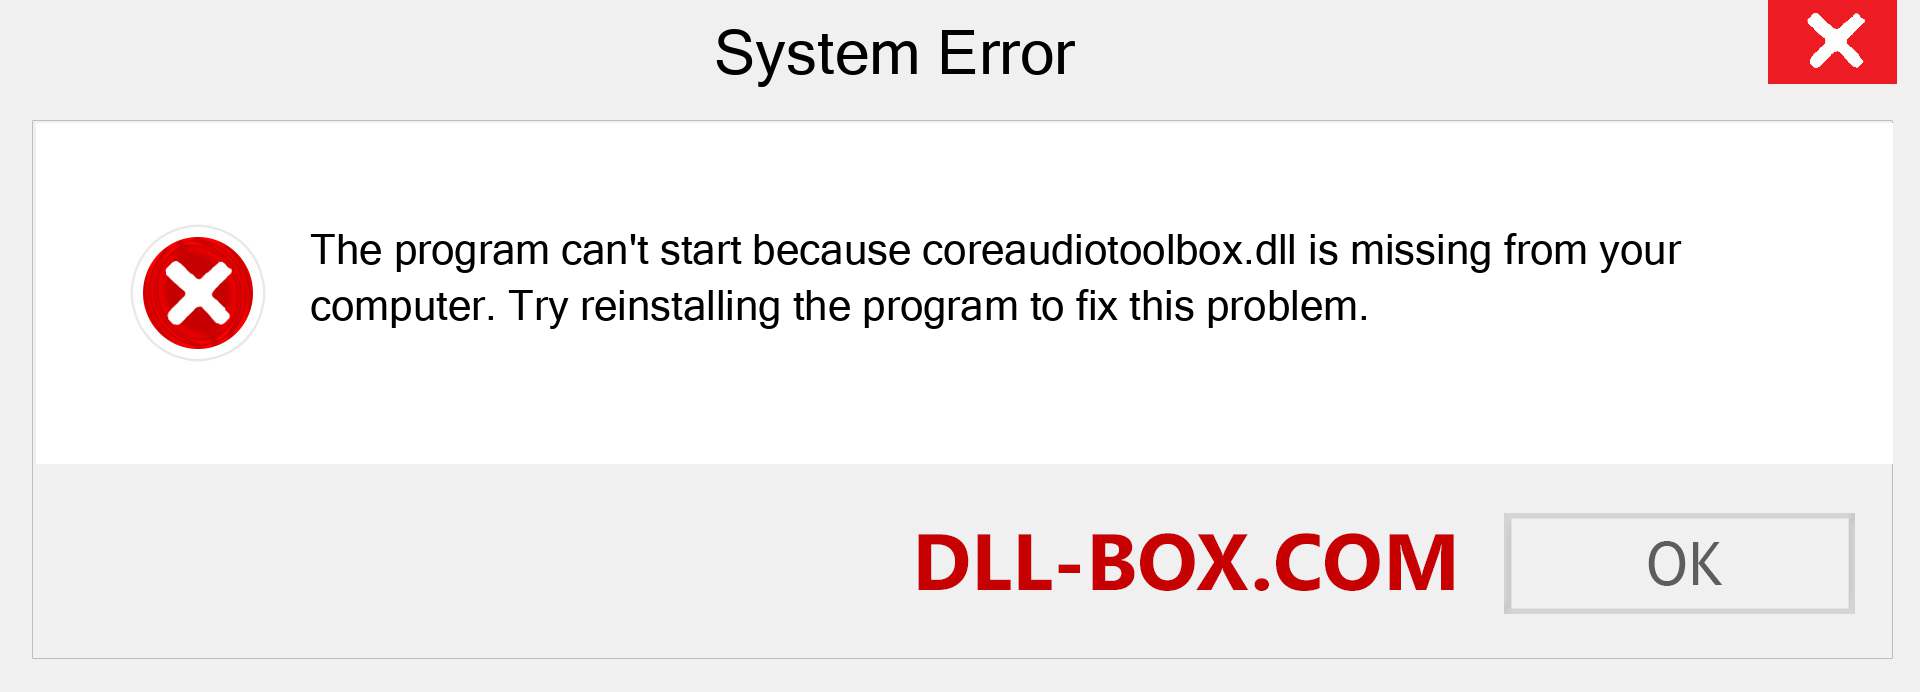  coreaudiotoolbox.dll file is missing?. Download for Windows 7, 8, 10 - Fix  coreaudiotoolbox dll Missing Error on Windows, photos, images